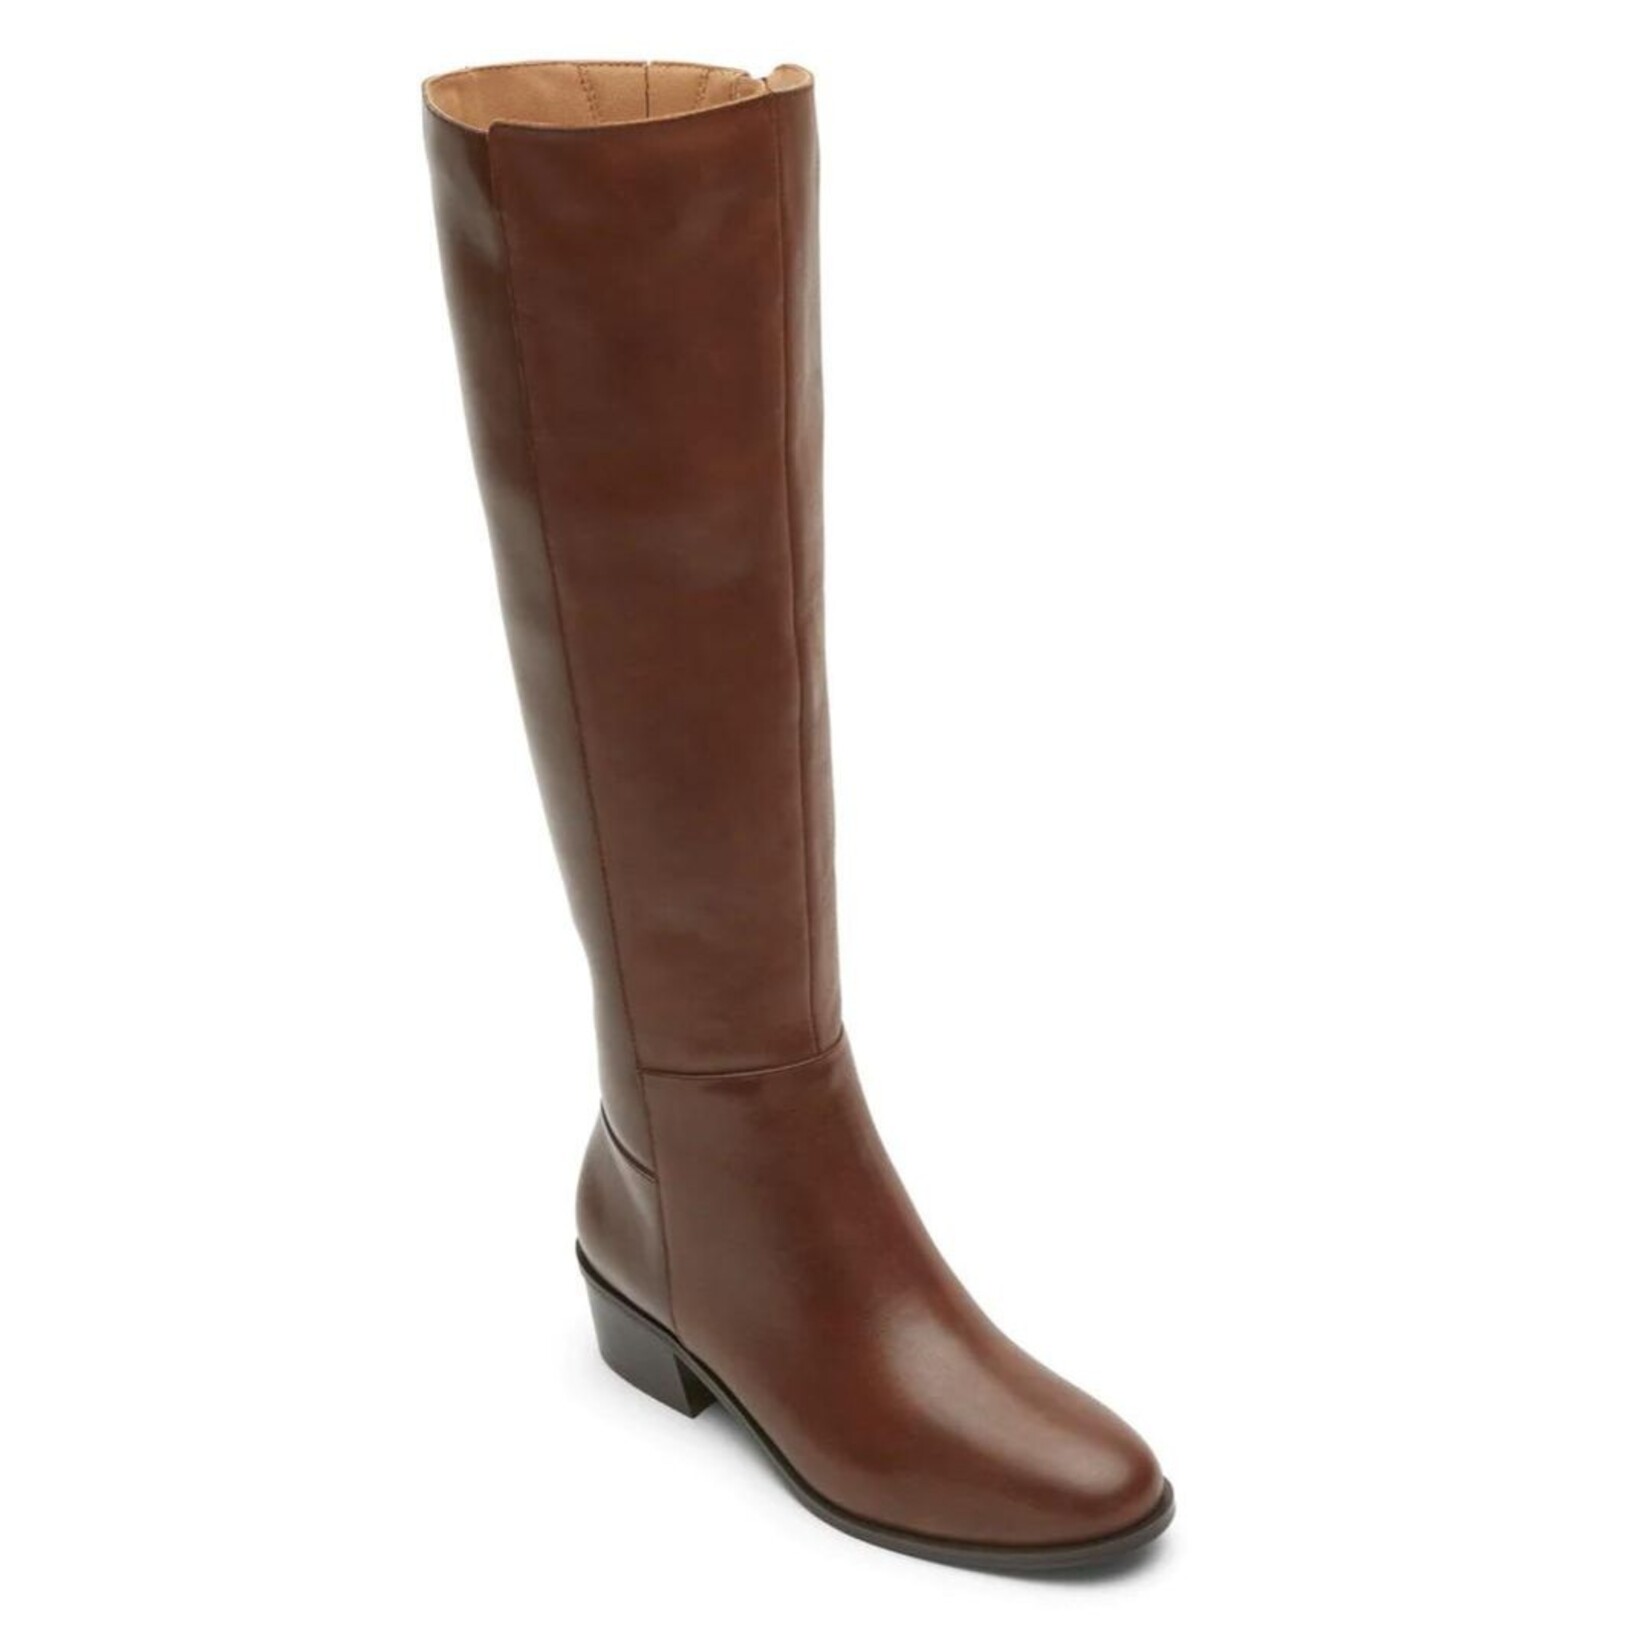 Rockport Rockport Evalyn Tall Boot Women's Fashion Boots